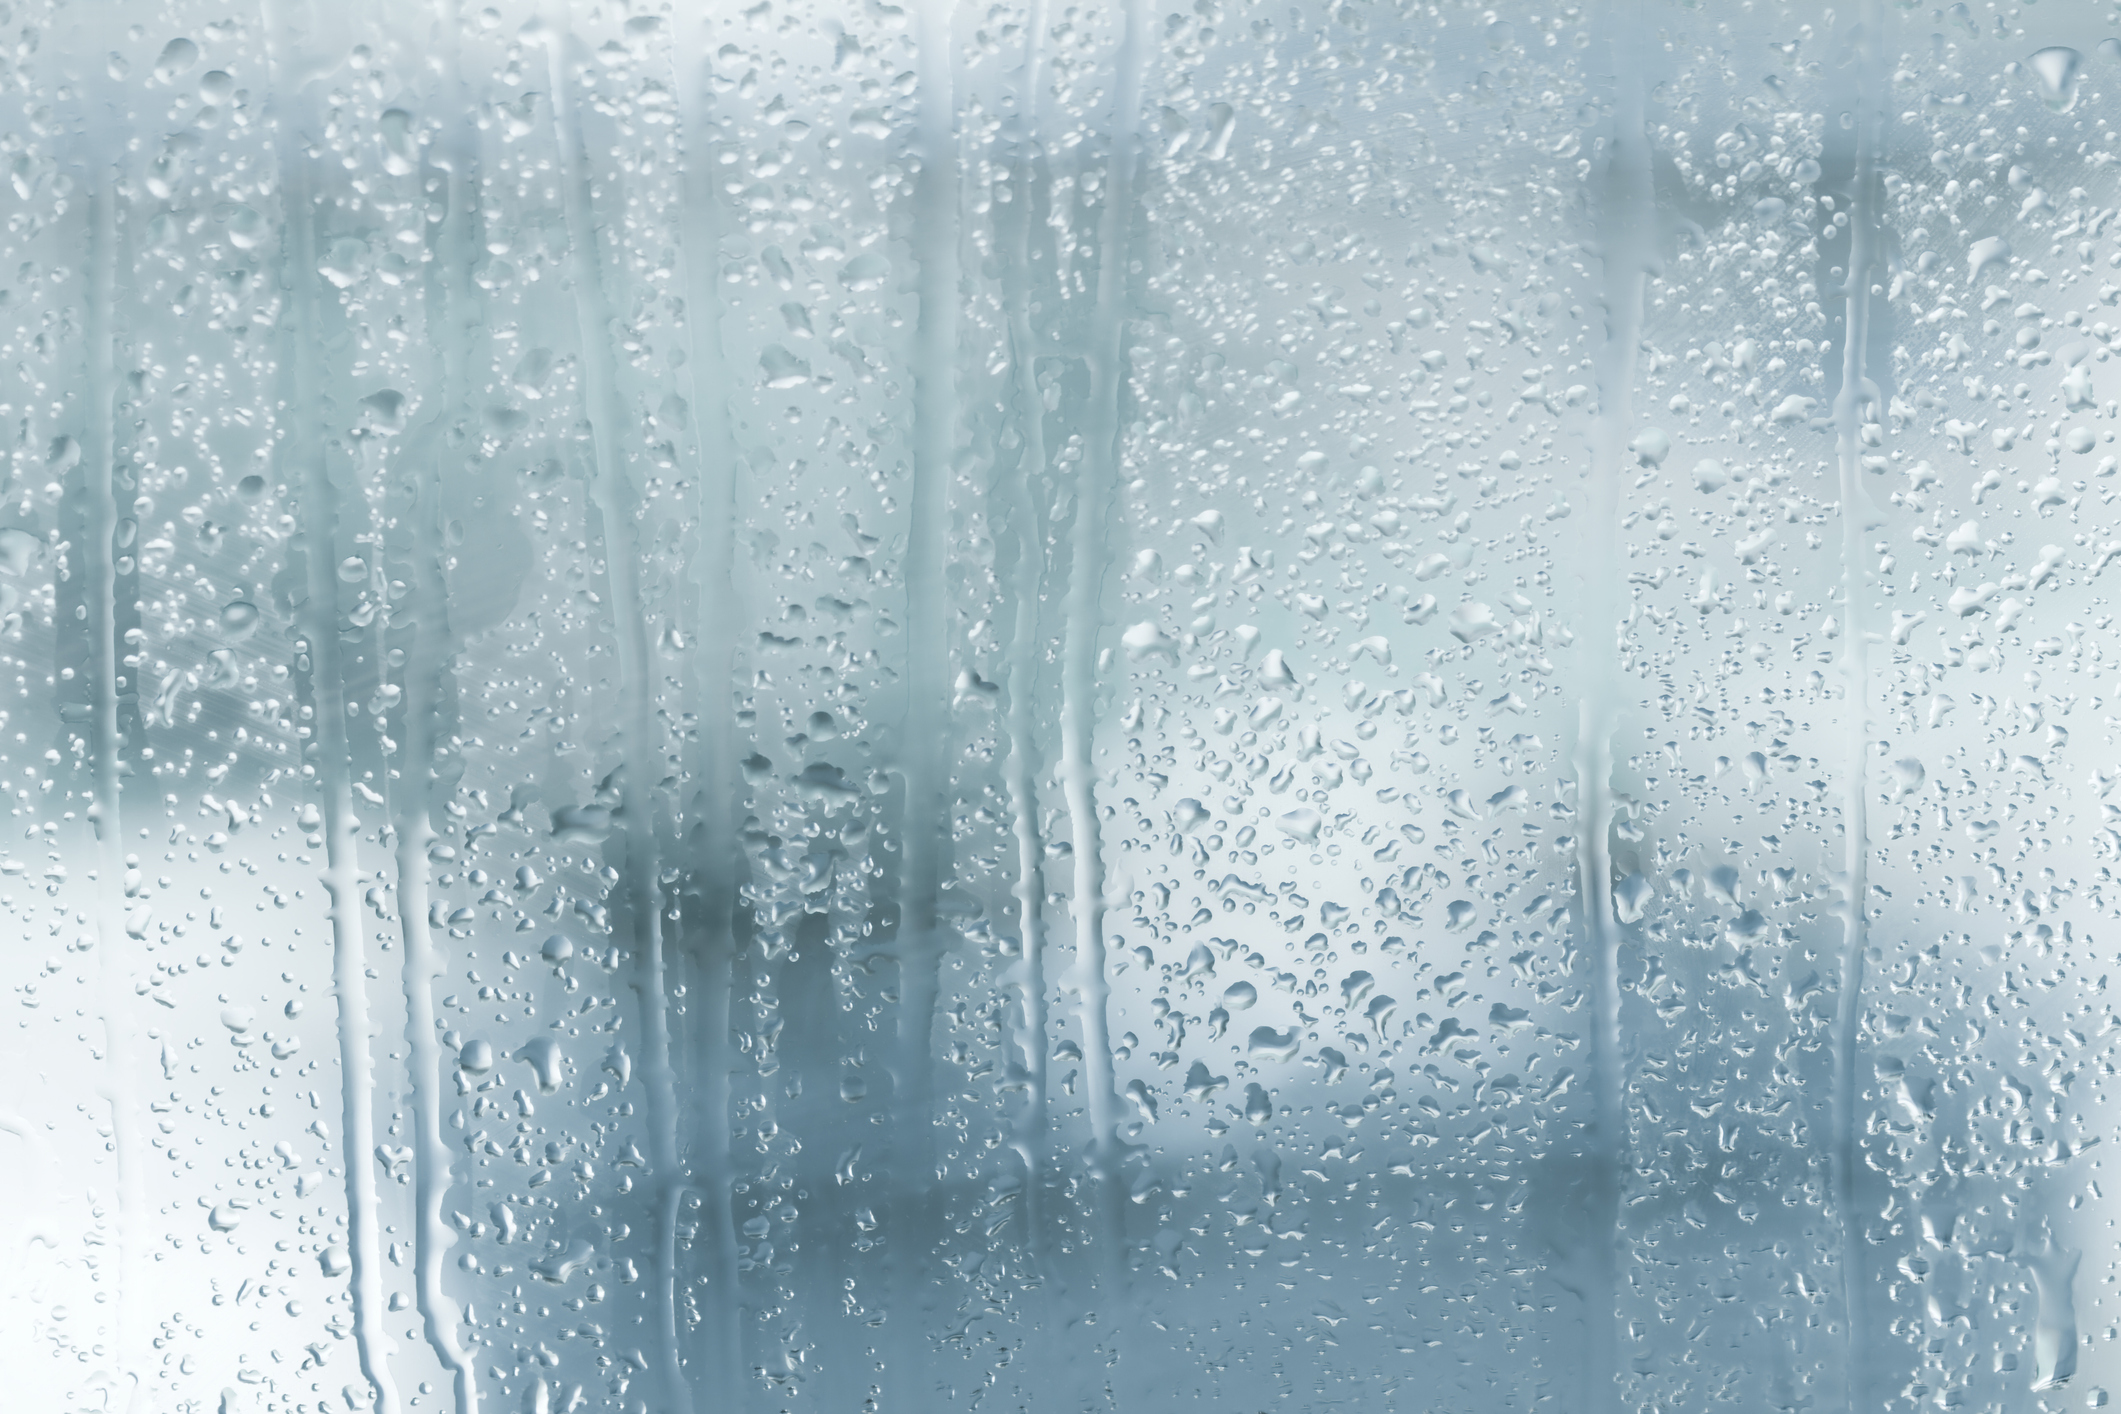 How to Reduce Your Home’s Humidity